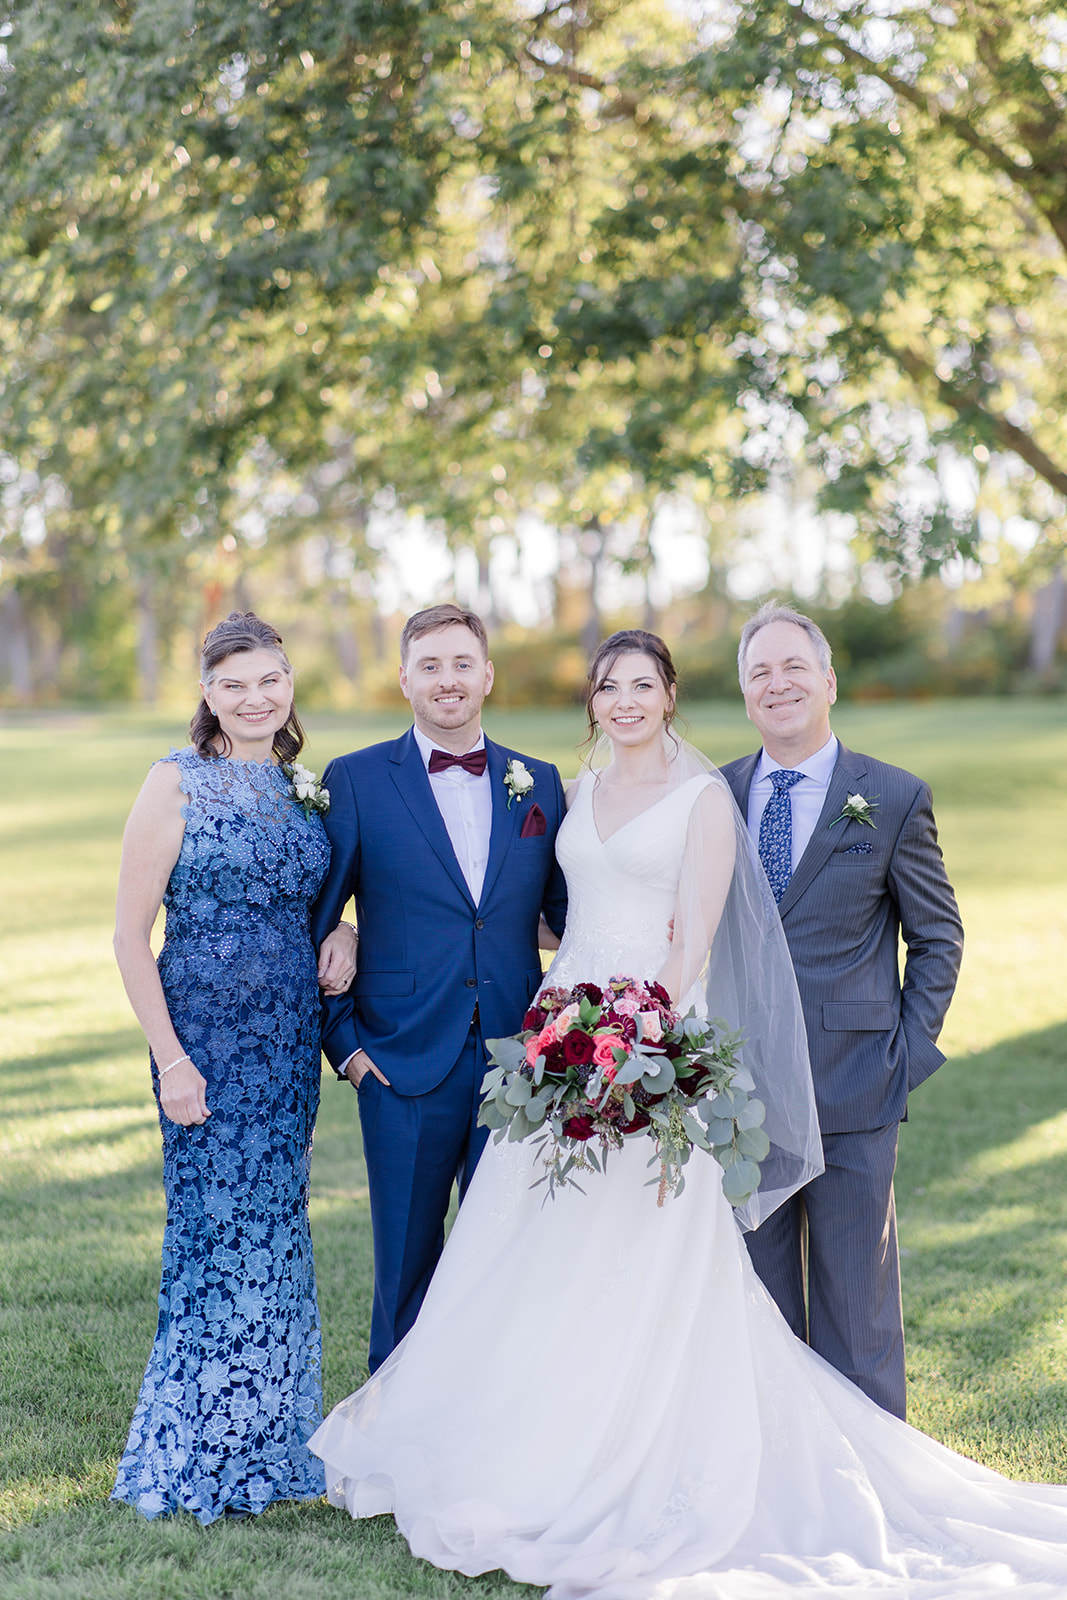 How to ensure your family portraits go smoothly on a wedding day. Photo taken at Arnprior wedding by Brittany Navin Photography